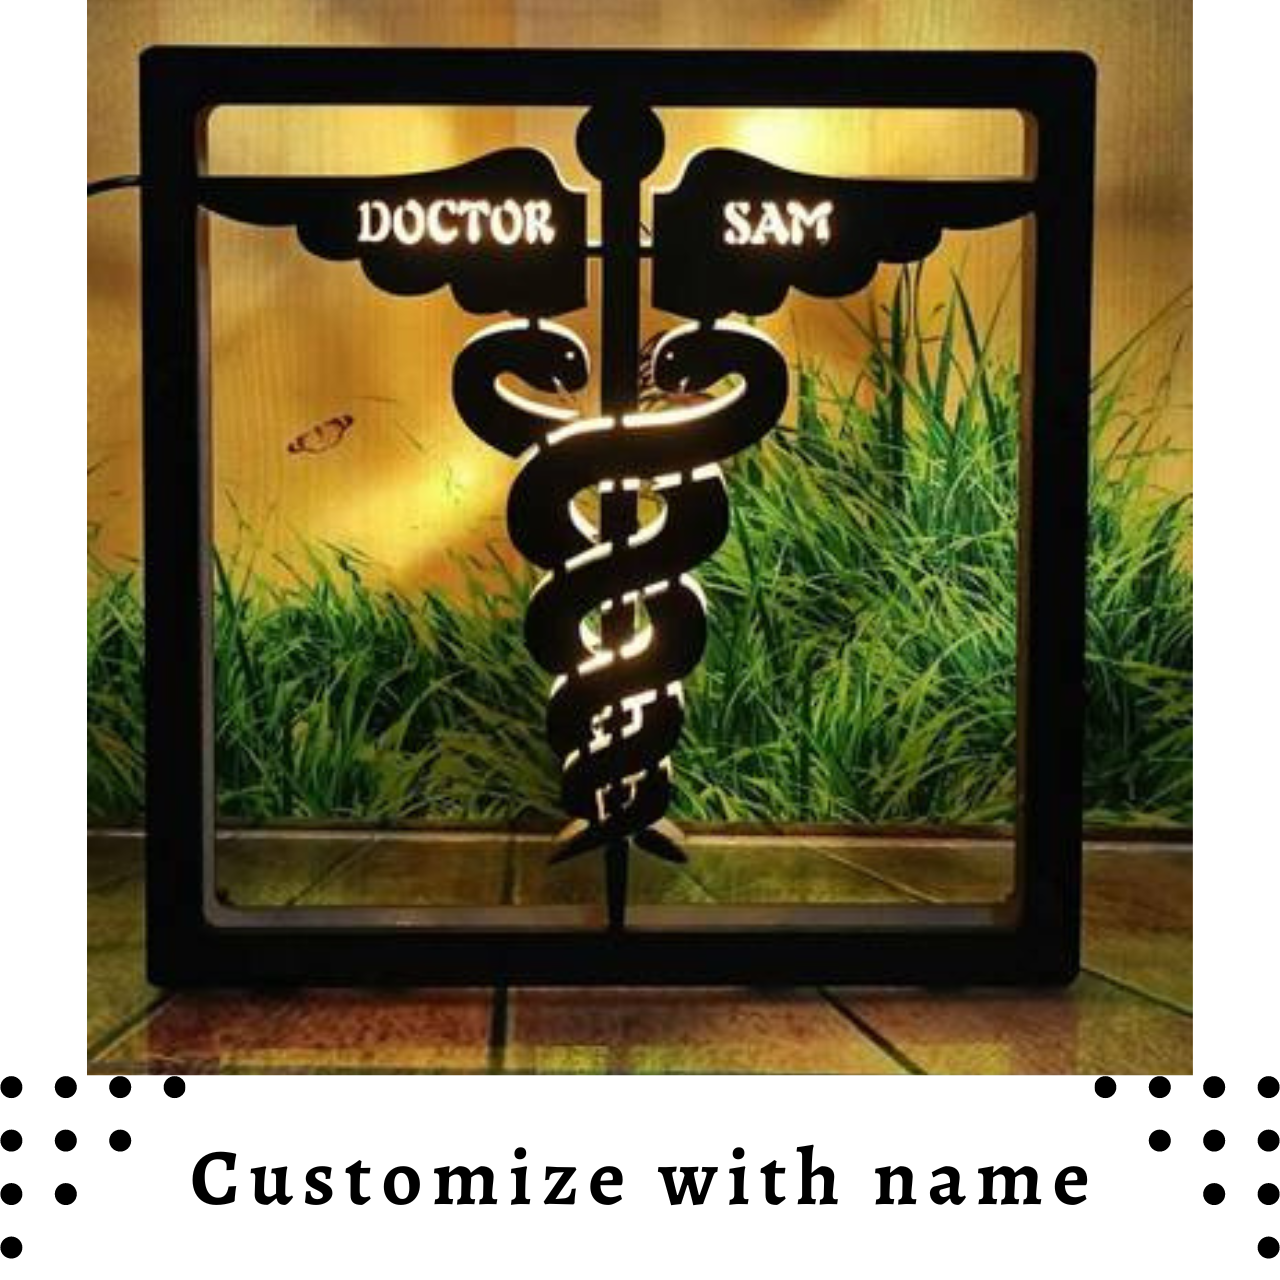 Customized Frame For Doctors | best gifts for Doctor | gifts for doctors | Birthday gift for Doctor| useful gifts for Doctor| Gifts for Doctors |gift ideas for Doctors